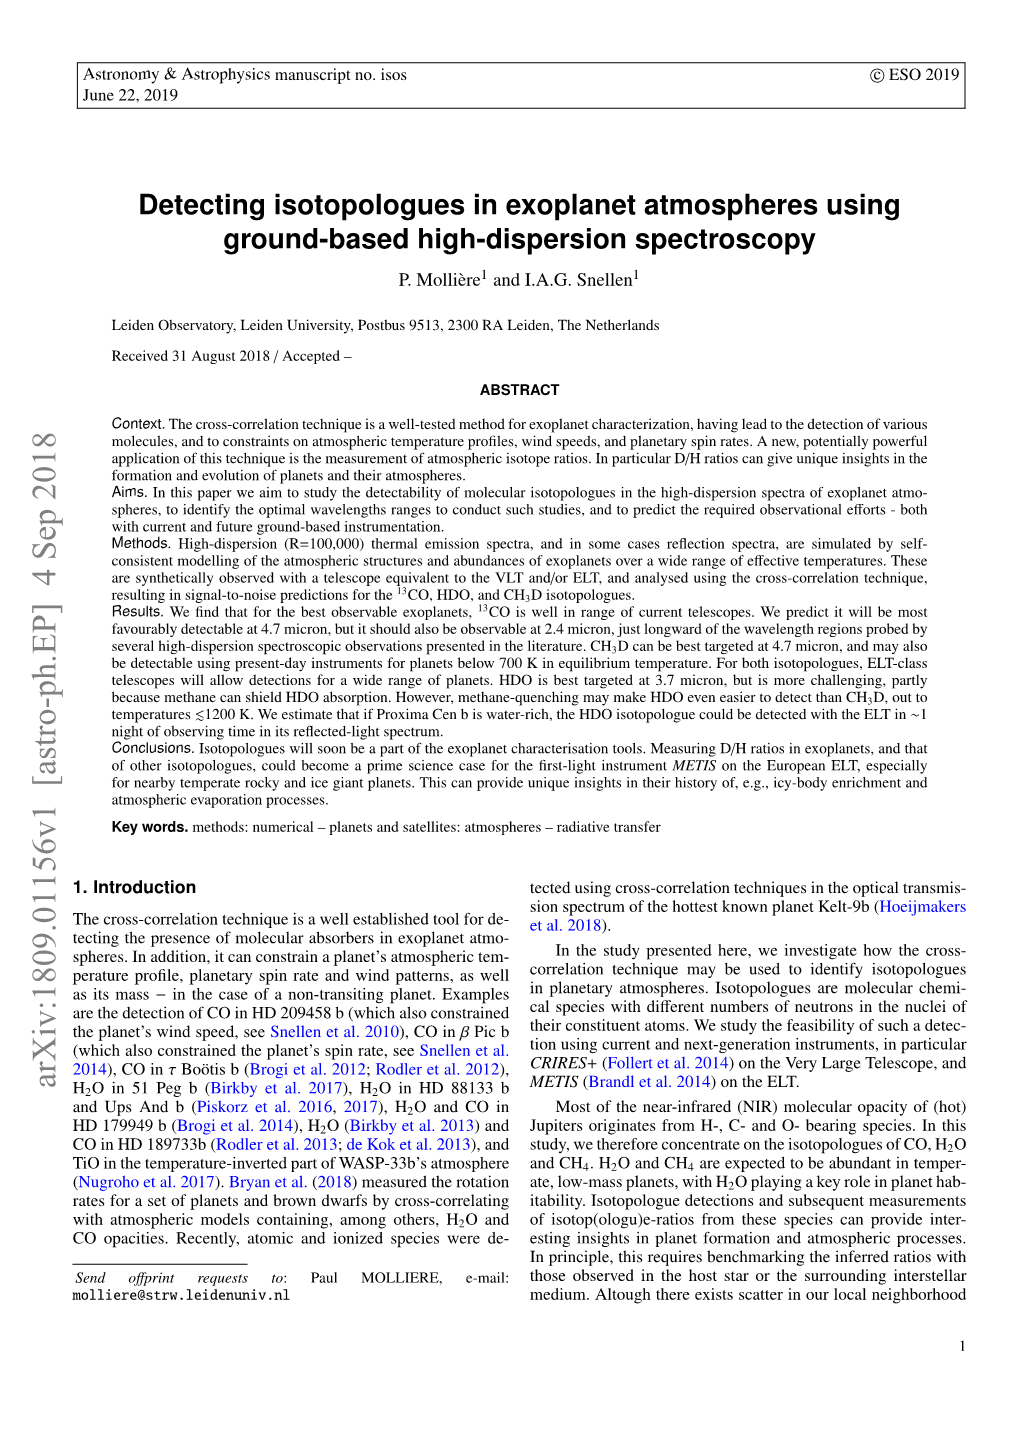 Detecting Isotopologues in Exoplanet Atmospheres Using Ground-Based High-Dispersion Spectroscopy P